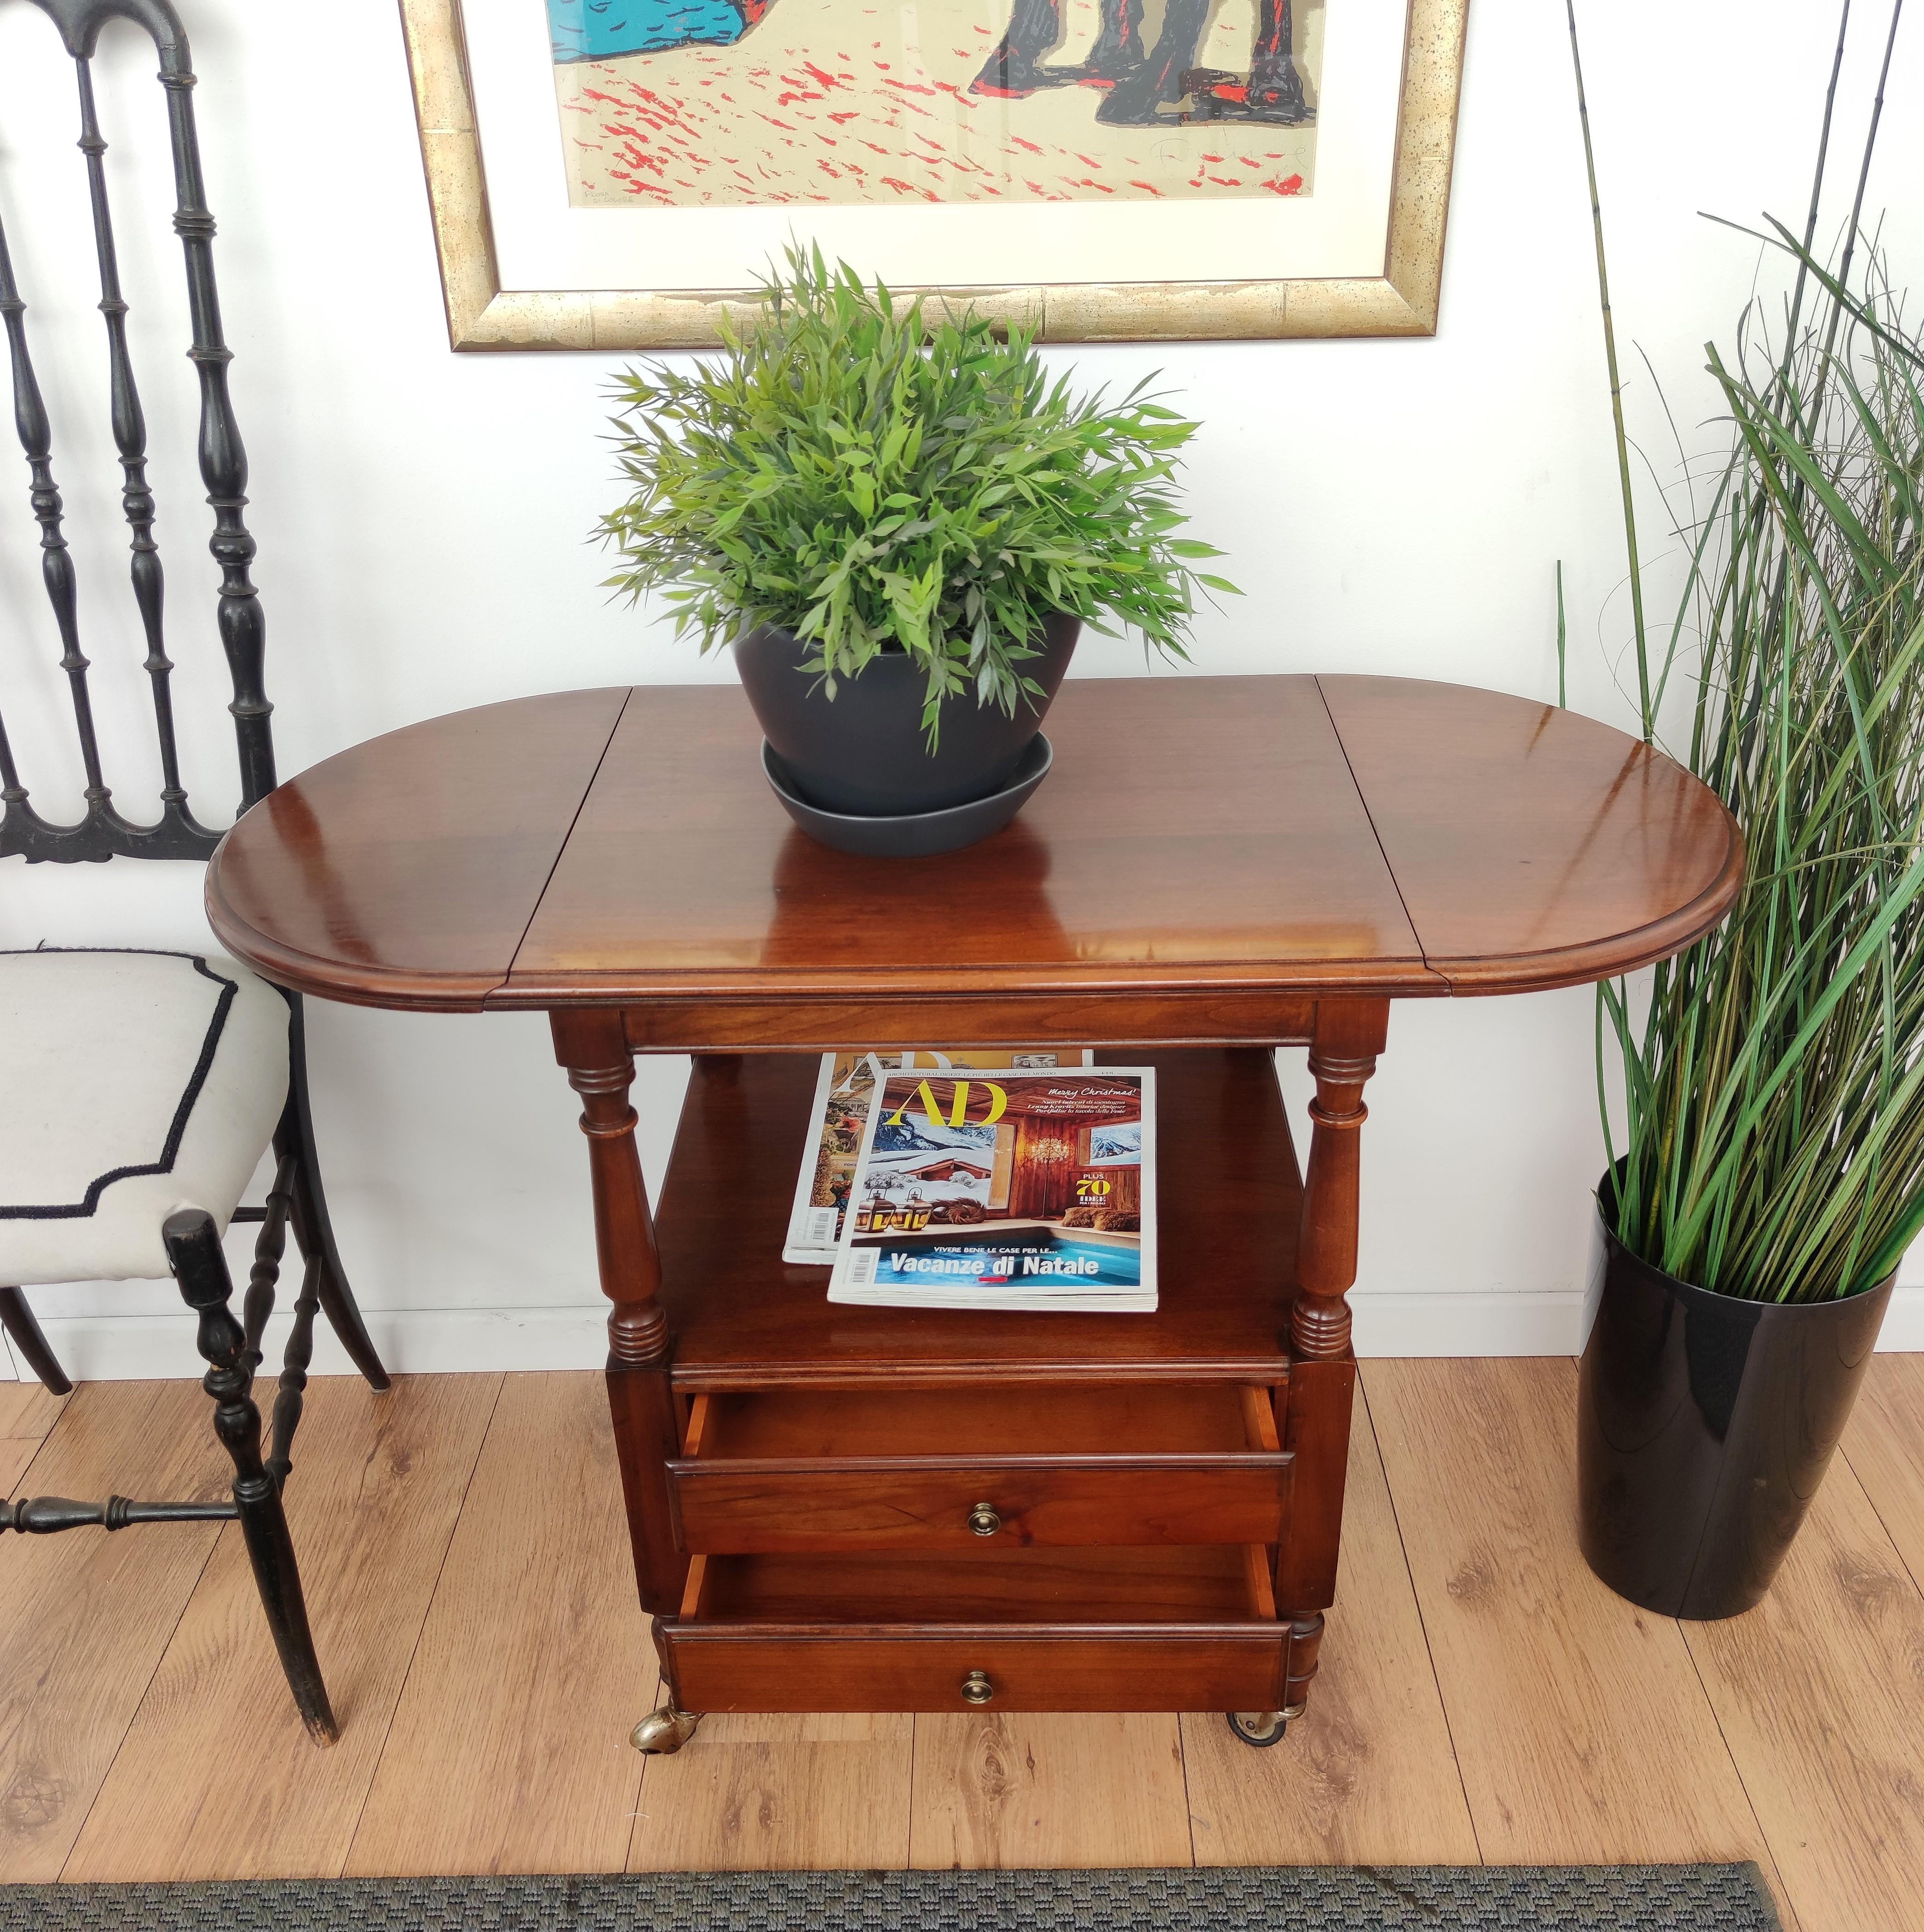 Beautiful French Louis XIII style walnut wood side table features demilune folding sides and great classic details in the trim molded top frame as well as the tapered legs and brass wheels final. This end or side table has a lower shelf and 2